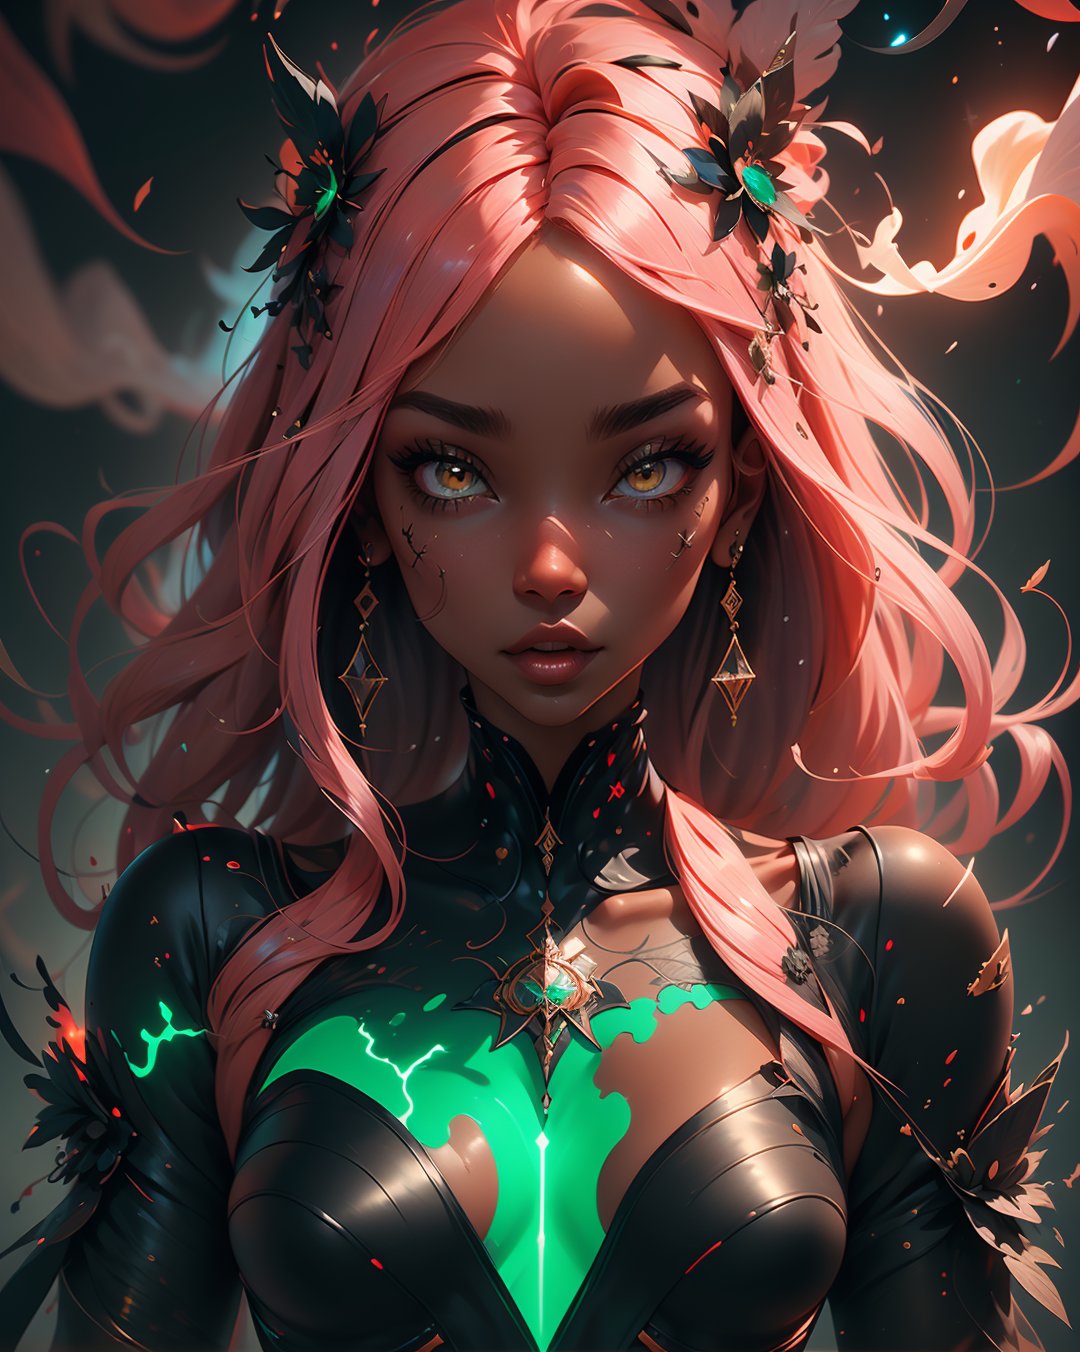 1 girl, full body, symmetrical face, perfect brown eyes, smoke, sparks, long  red neon hair, dark skin, mix of gothic and realism, ultra high resolution, 8k, HDr, 
 green neon,  art, high detail , ,art,yuzu